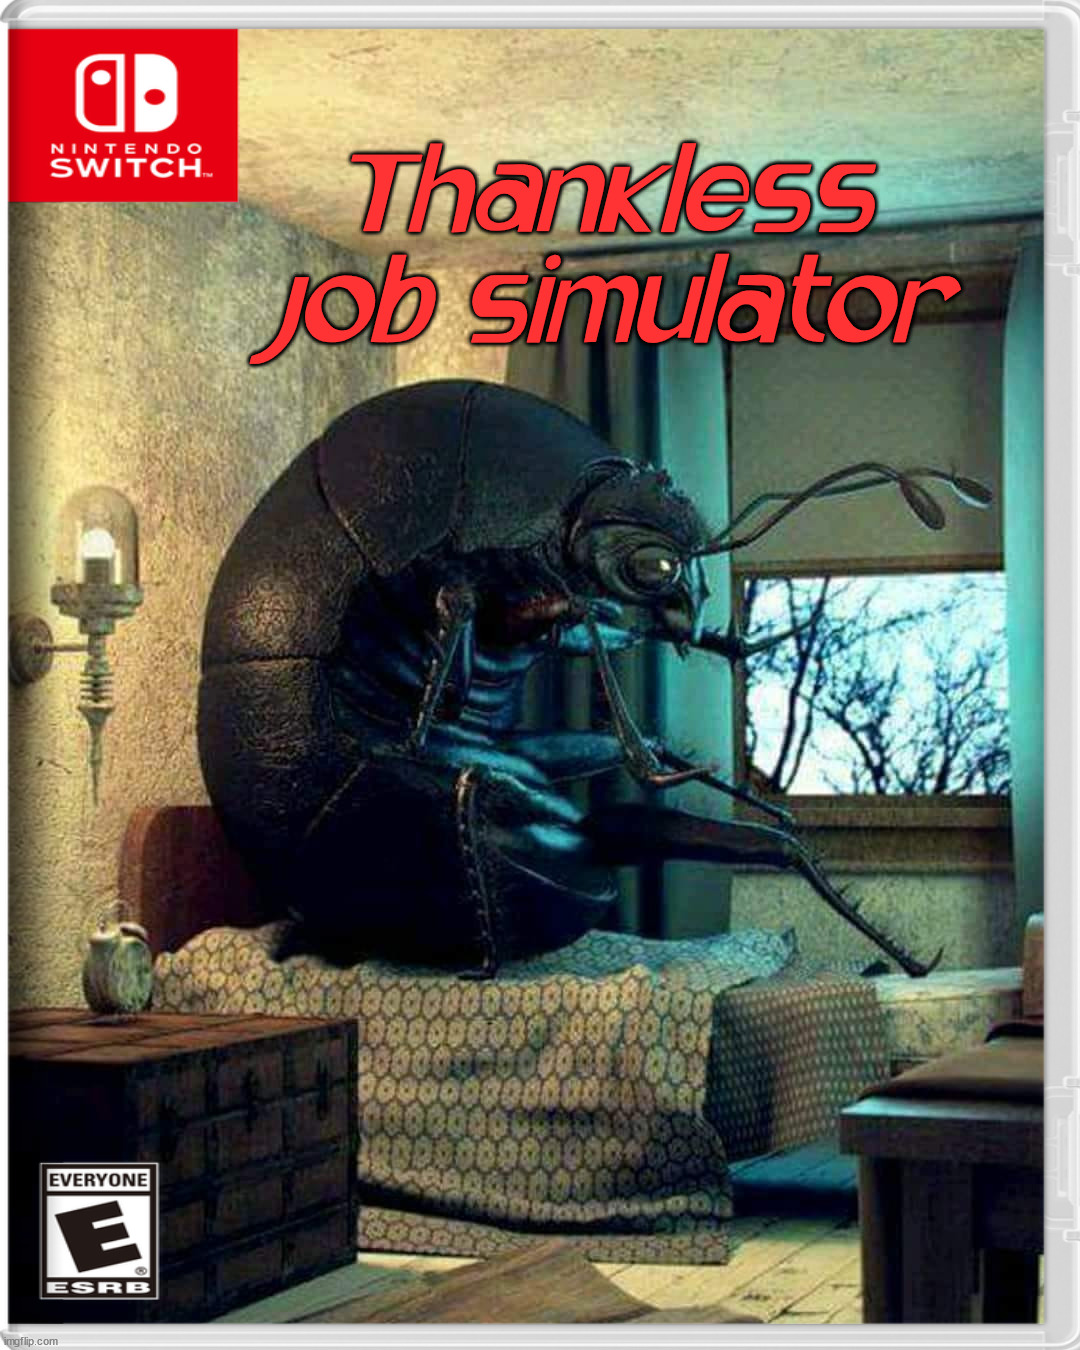 Thankless job simulator | image tagged in nintendo switch | made w/ Imgflip meme maker